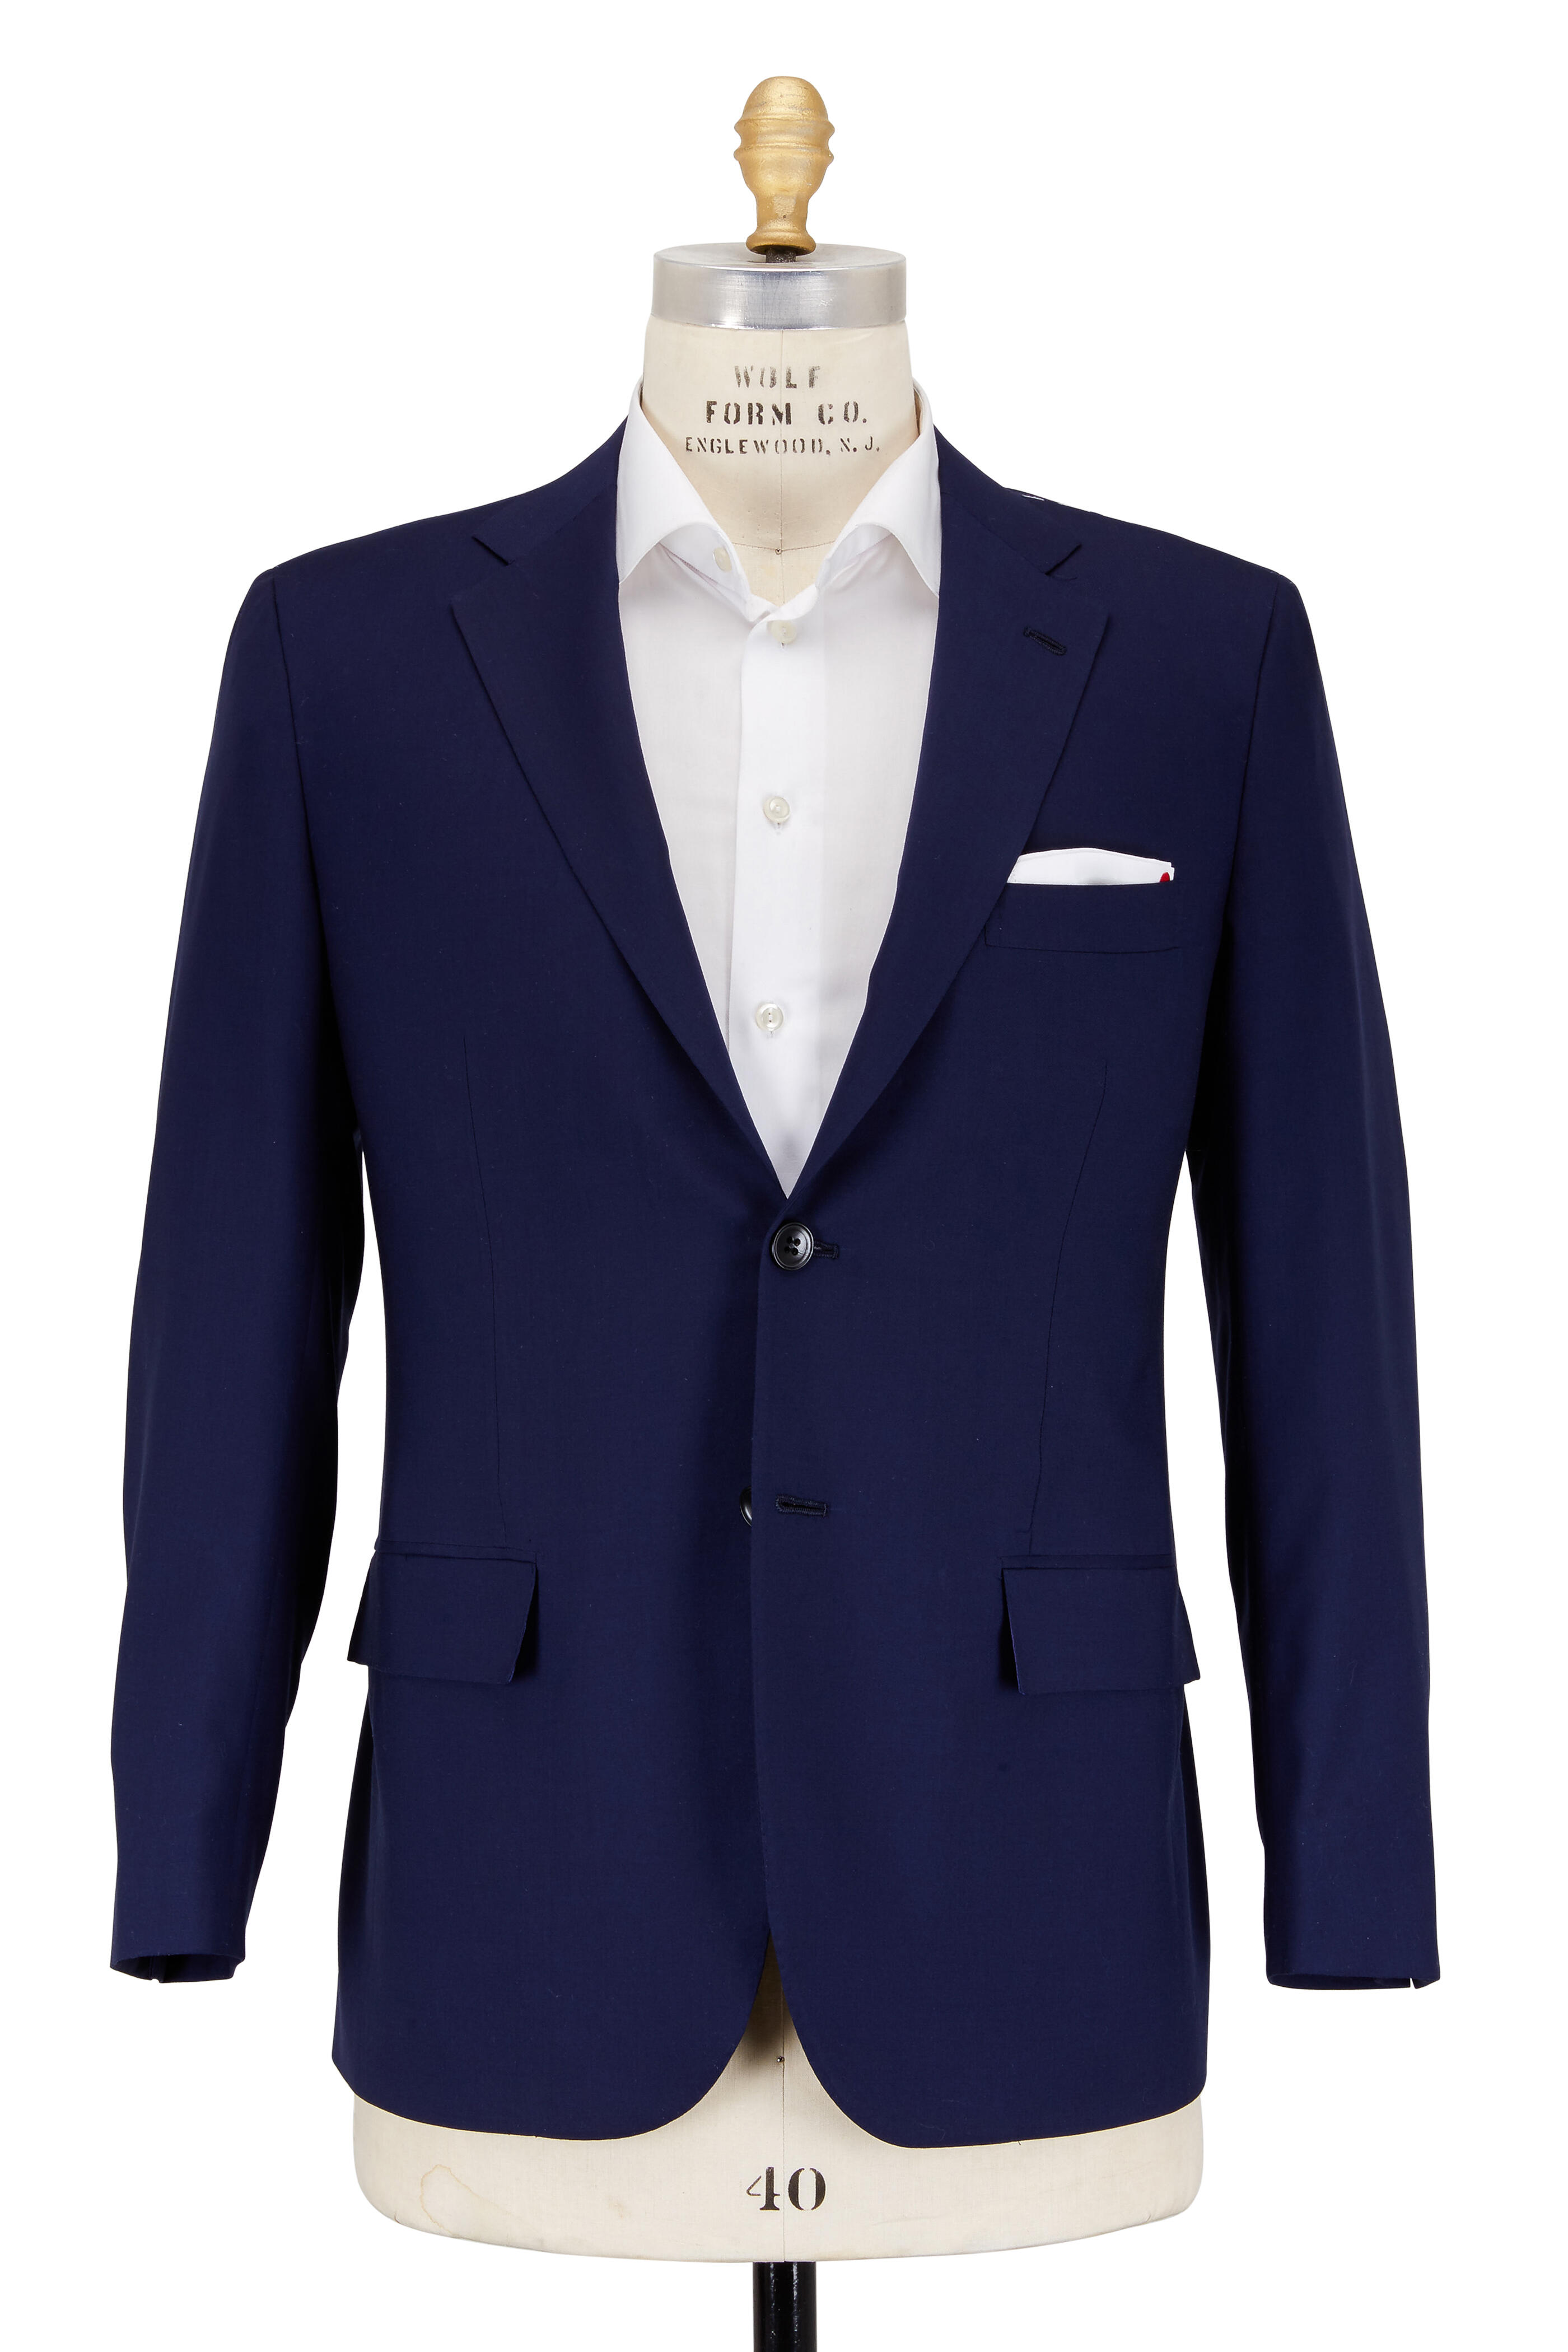 Kiton - Navy Blue Cashmere Sportcoat | Mitchell Stores